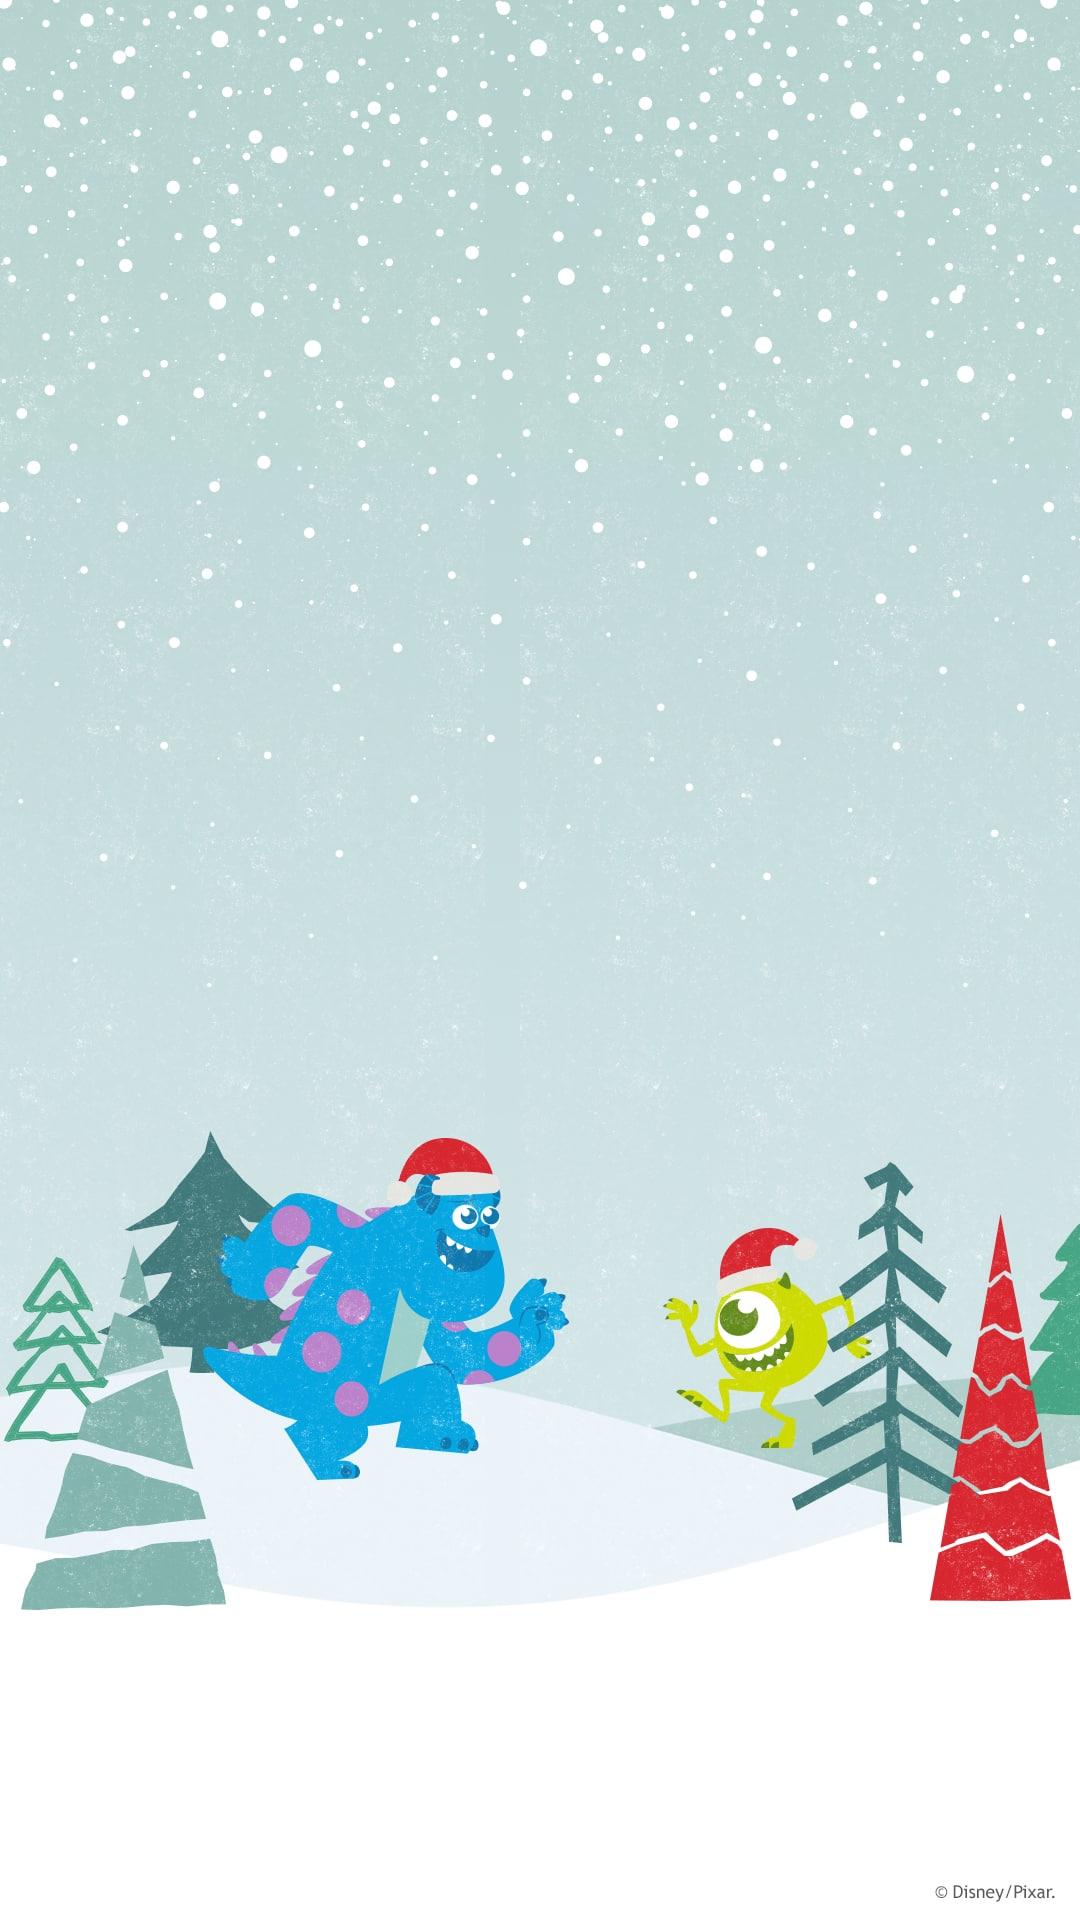 Pixar Holiday Wallpaper iPhone Android Apple Watch Disney